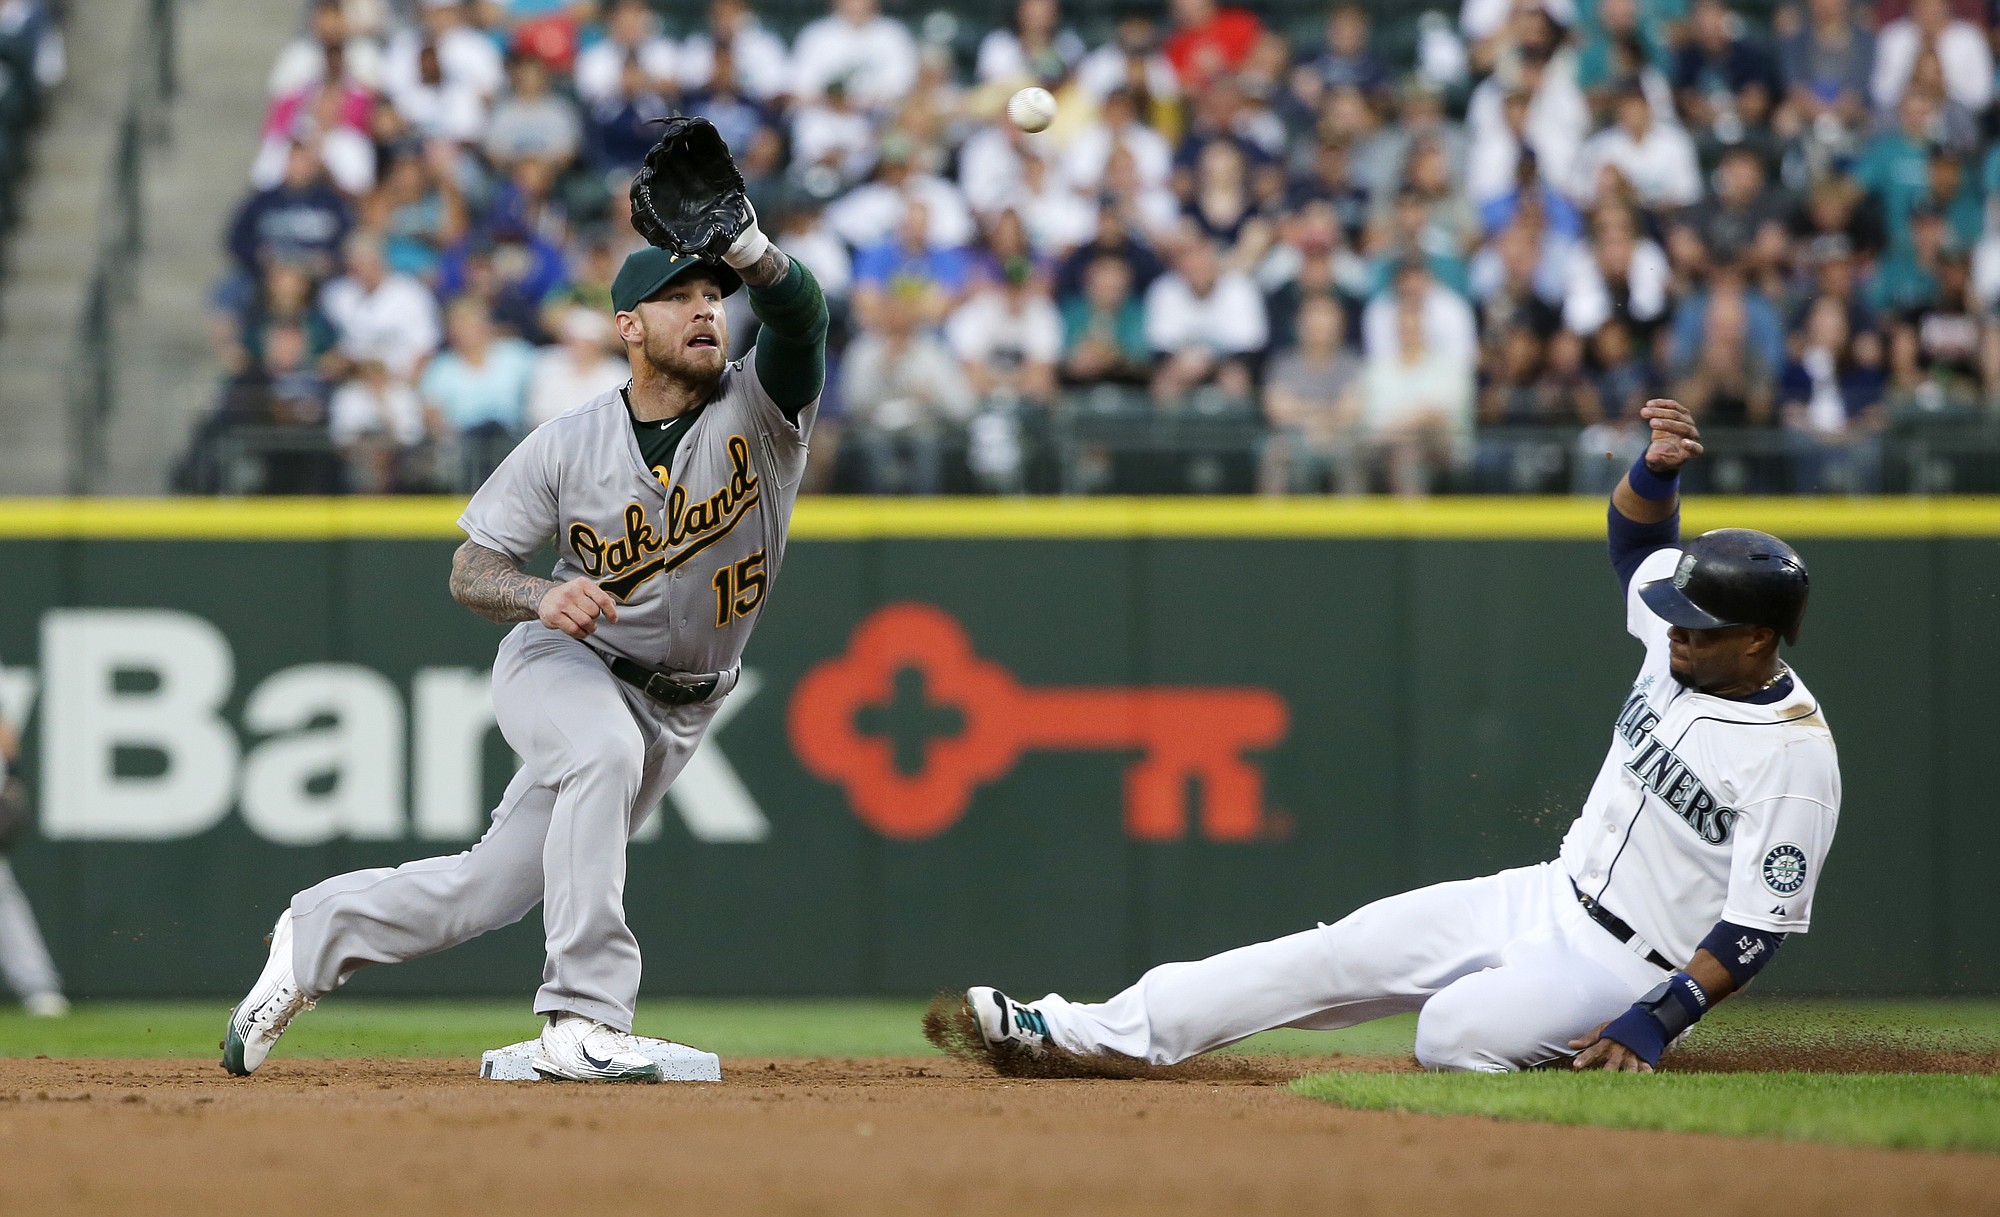 Oakland Athletics third baseman Brett Lawrie reaches to catch the pick-off throw as Seattle Mariners' Robinson Cano, right, attempts to steal second base in the second inning Monday, Aug. 24, 2015, in Seattle. Lawrie's tag on Cano was ruled an out after the initial safe call on the field was challenged by the Athletics. (AP Photo/Ted S.